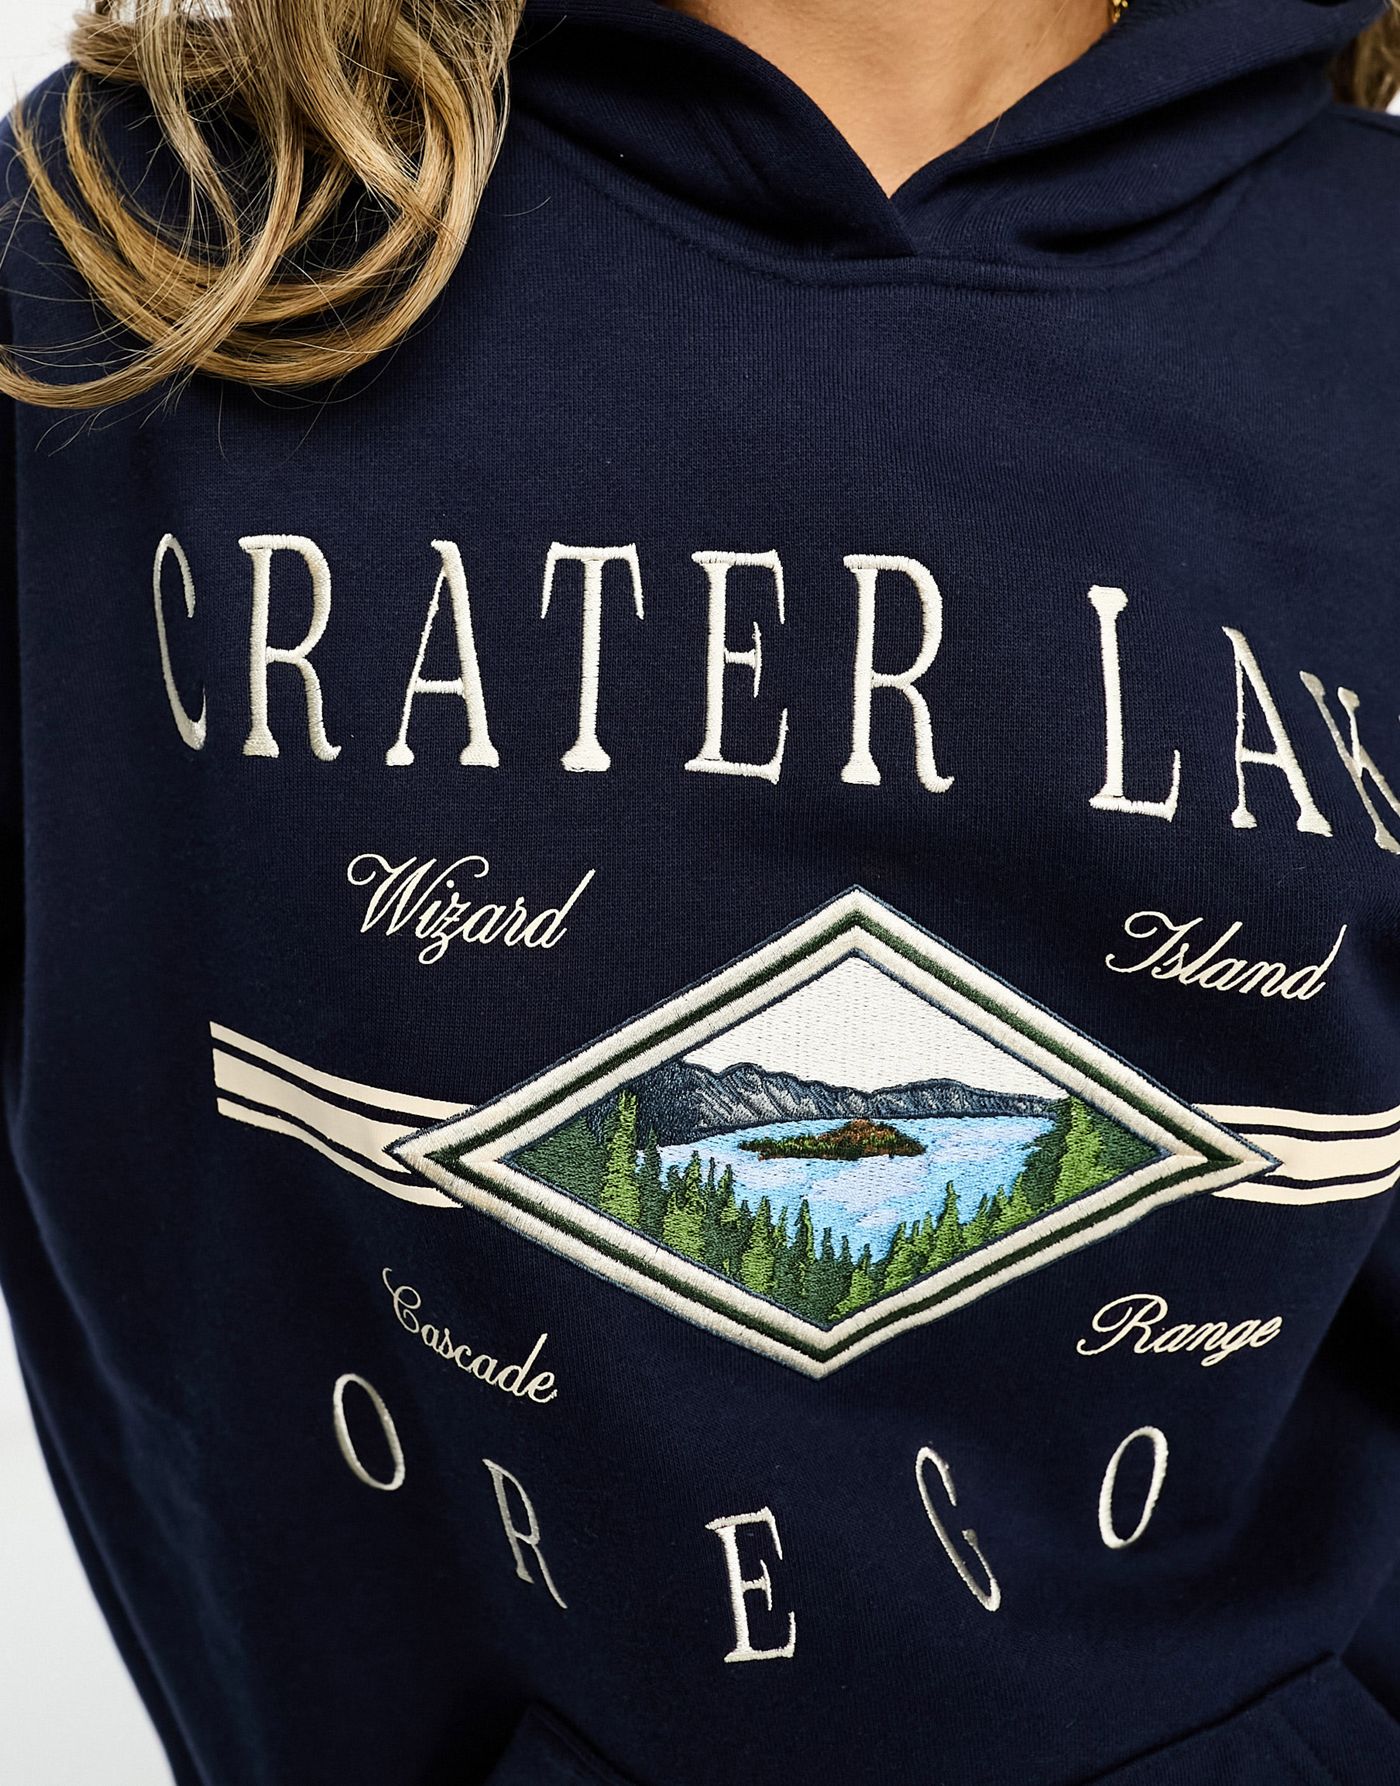 Pacsun crater lake slogan hoodie co-ord in navy